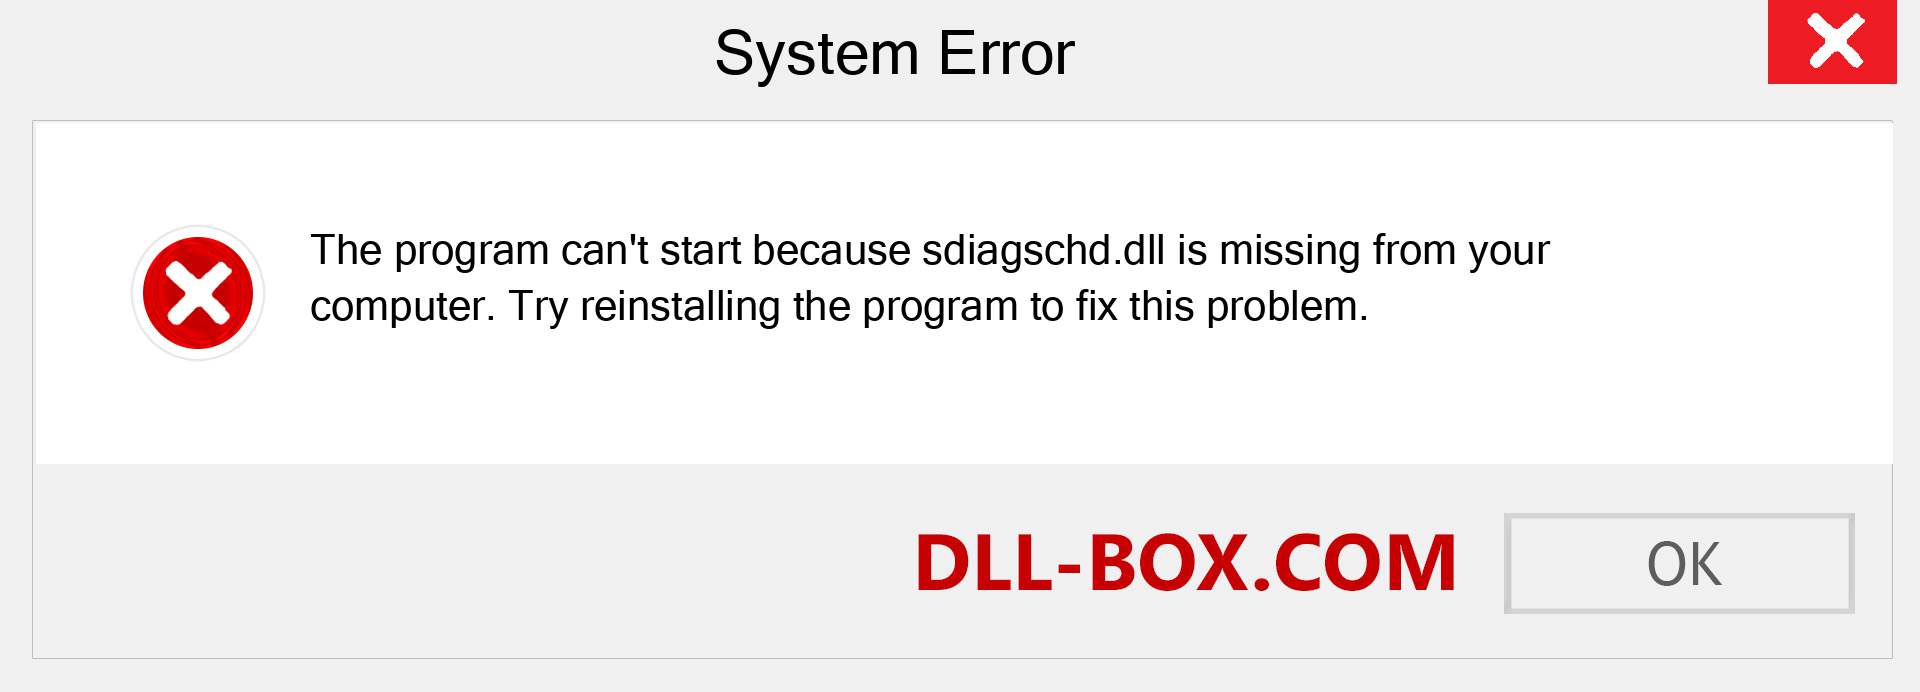  sdiagschd.dll file is missing?. Download for Windows 7, 8, 10 - Fix  sdiagschd dll Missing Error on Windows, photos, images